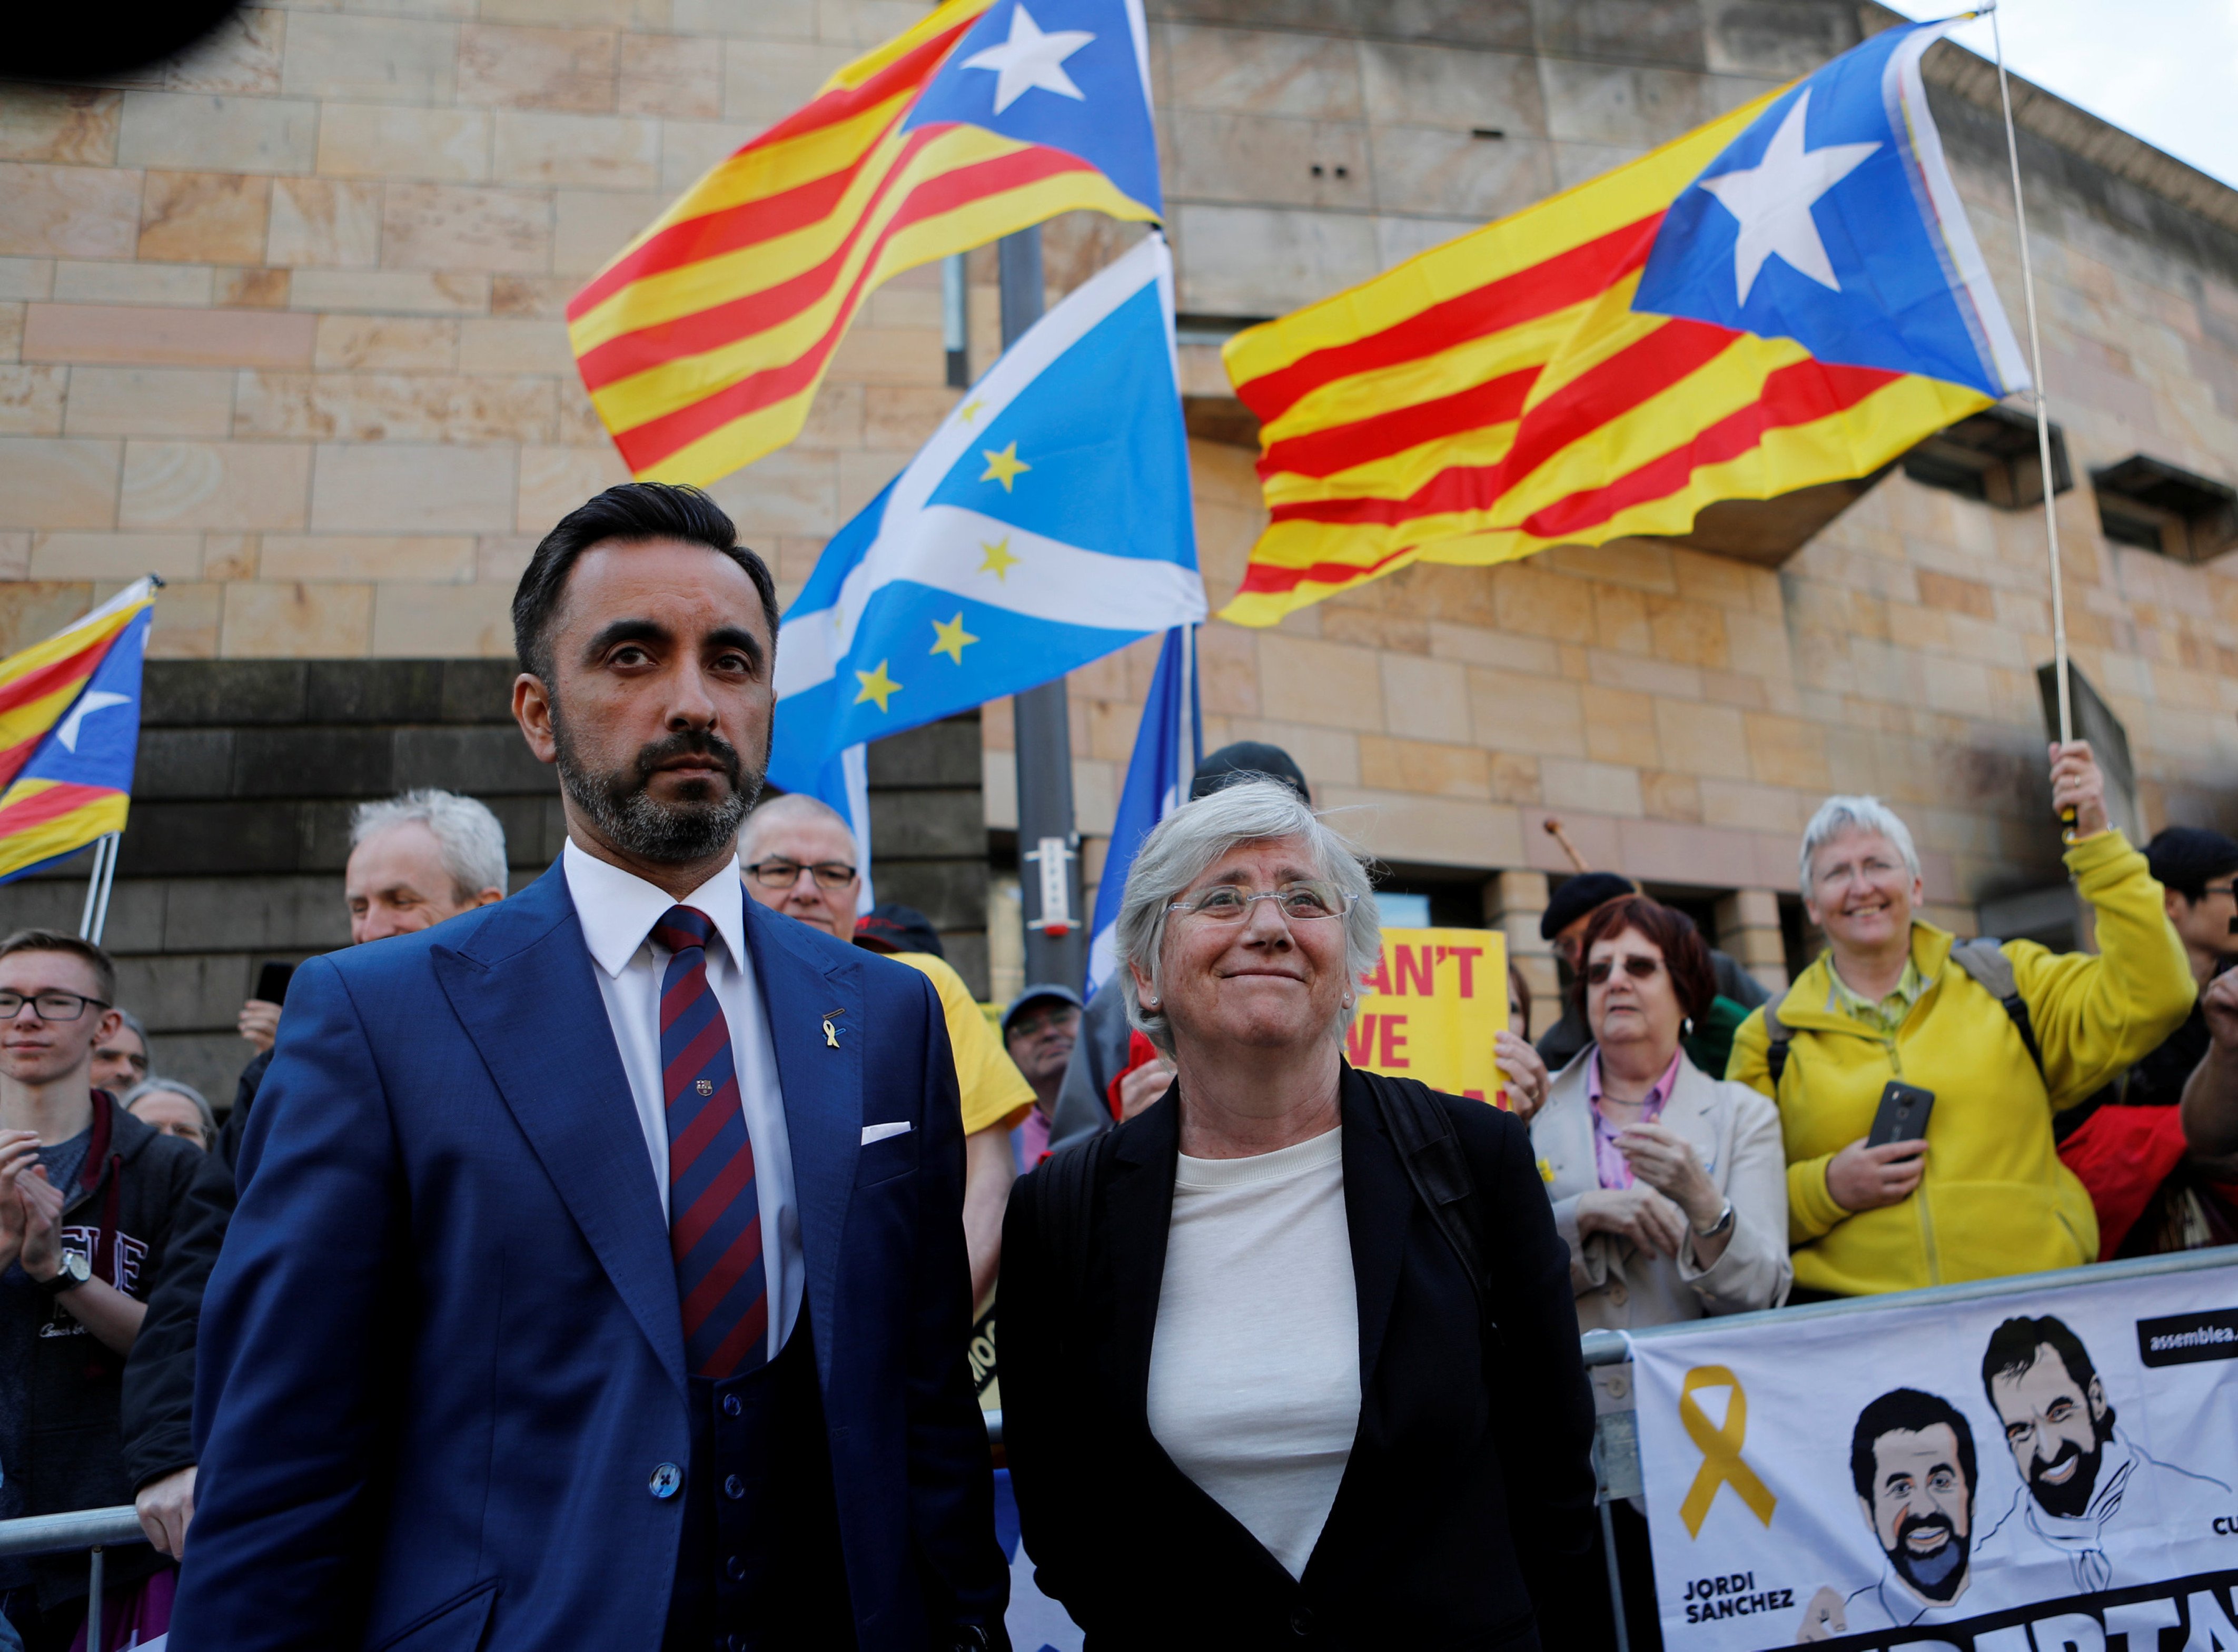 Hearing in Scotland to decide on Ponsatí's extradition request by Spain